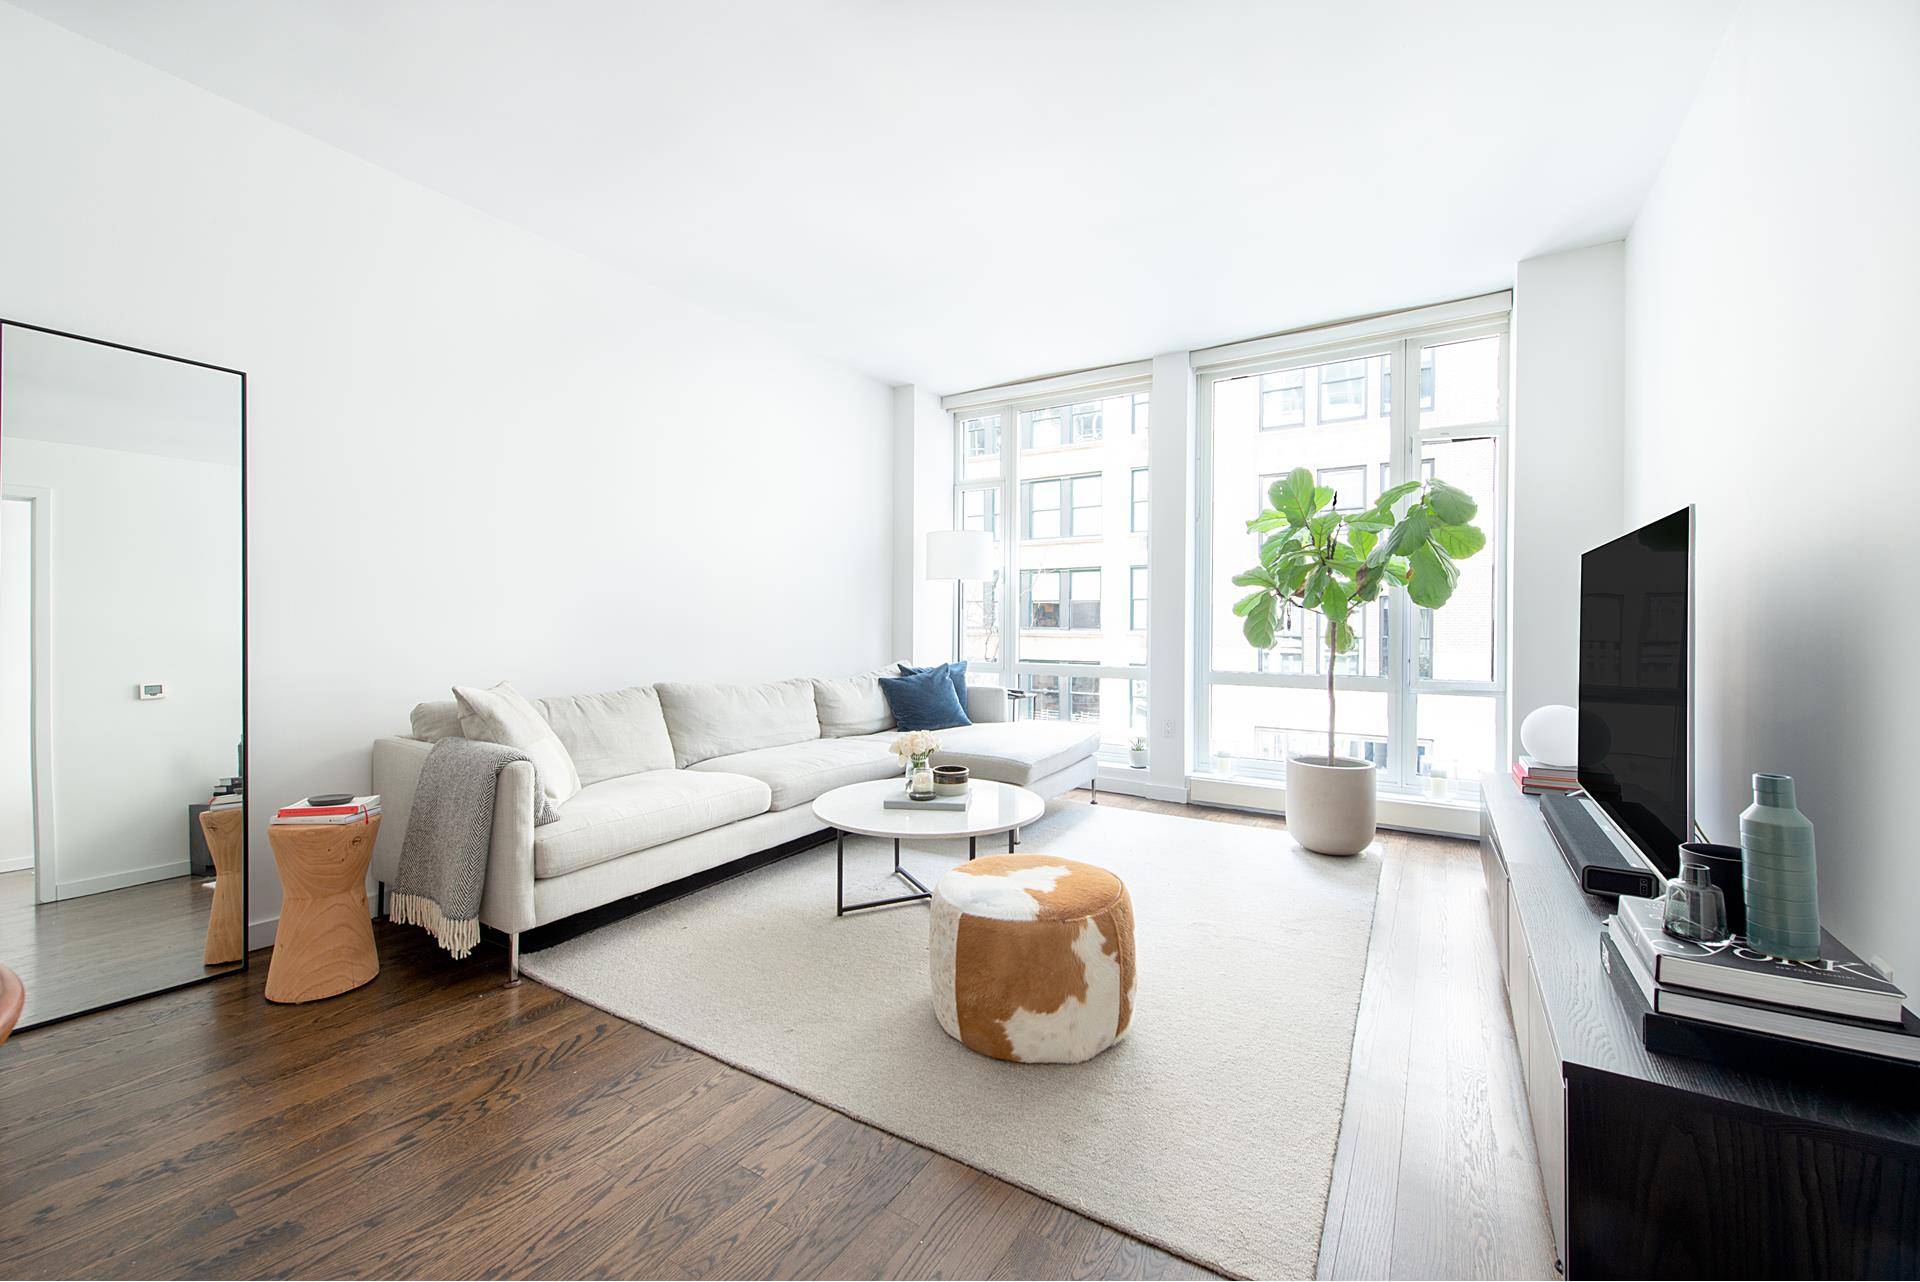 Rare opportunity to buy the largest one bedroom, one and a half bathroom apartments in one of the best full service boutique condos in Chelsea !